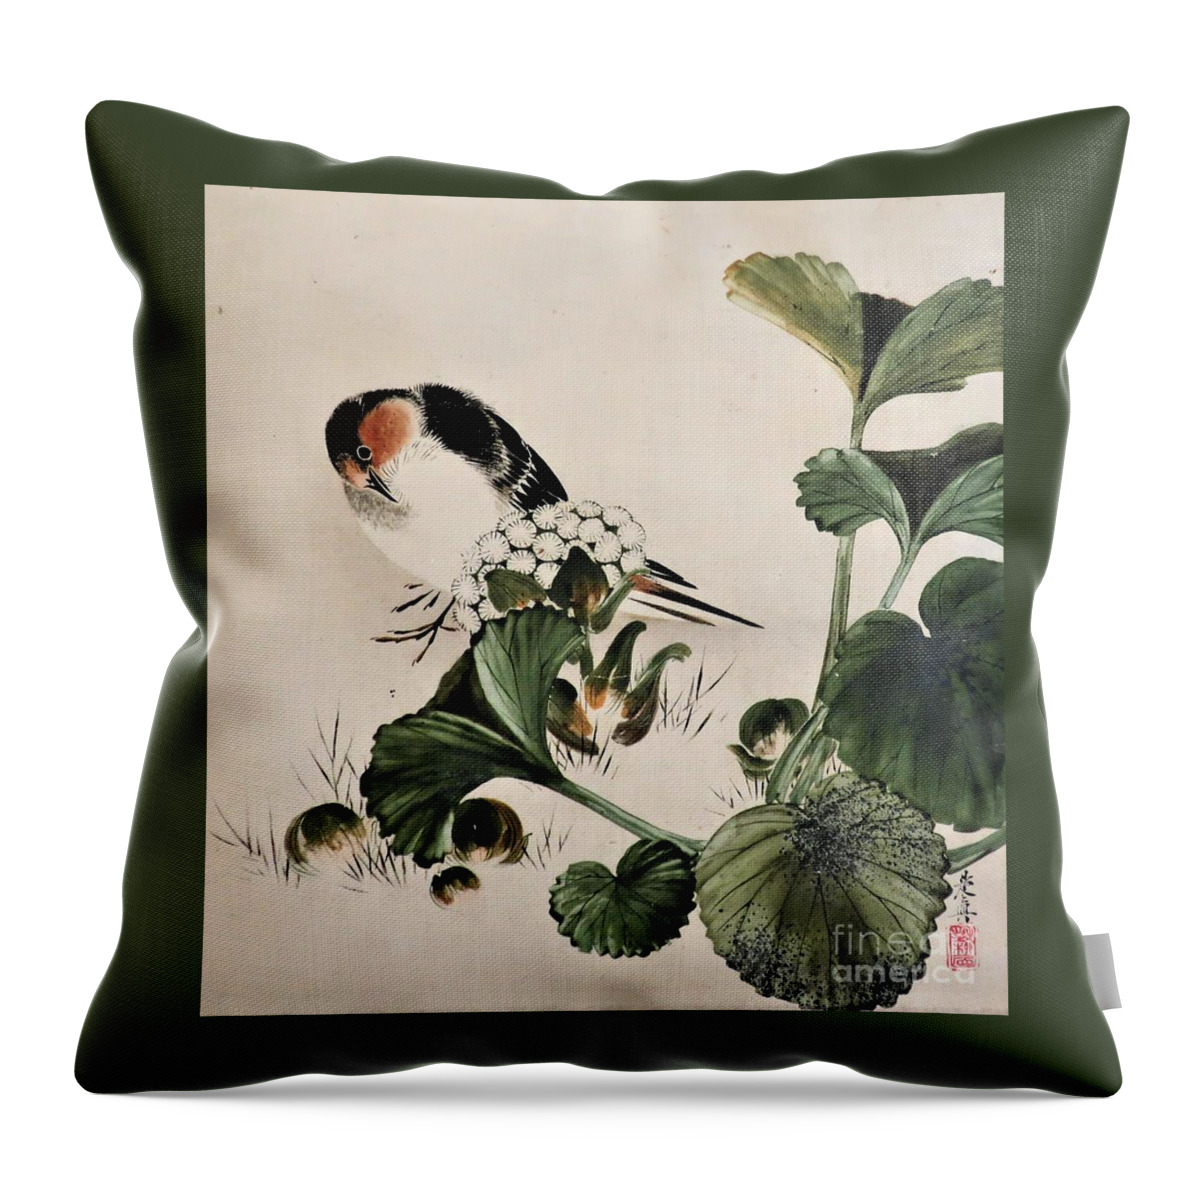 Uspd: Cco 1.0: Reproduction Throw Pillow featuring the painting Bird leafy plant by Thea Recuerdo